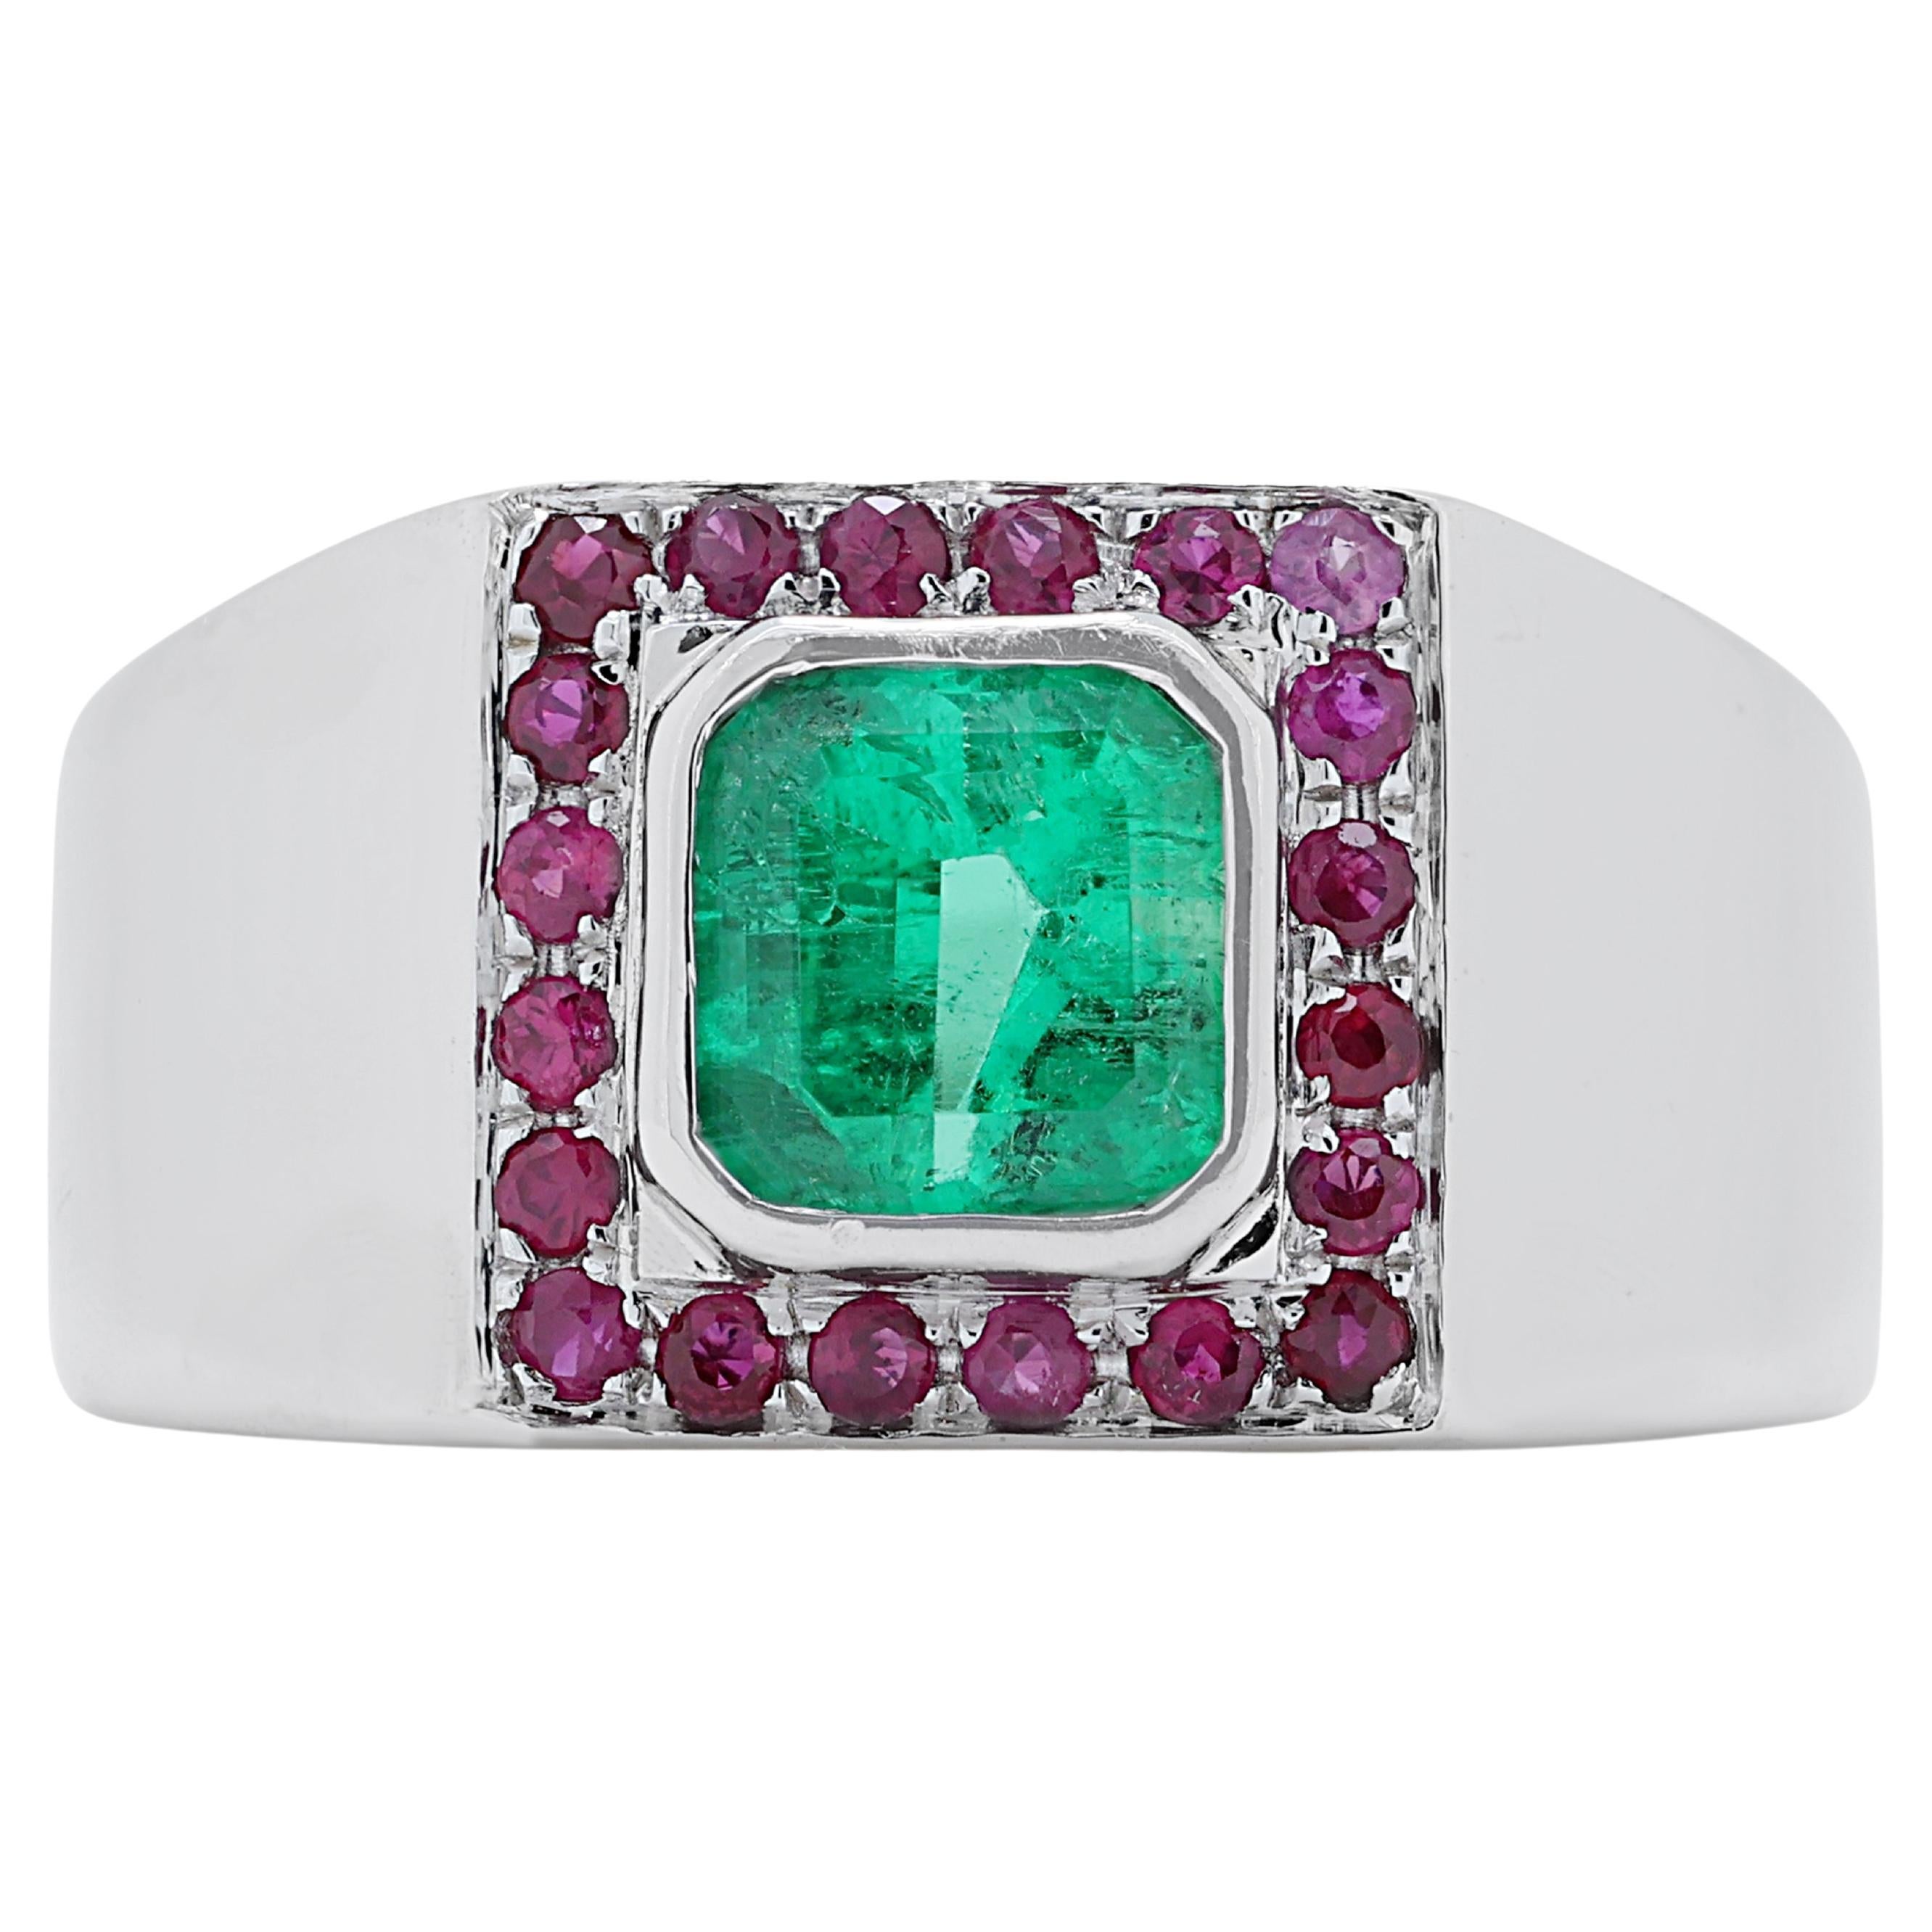 Stylish 1.05ct Emerald Dome Ring in 18K White Gold with Rubies